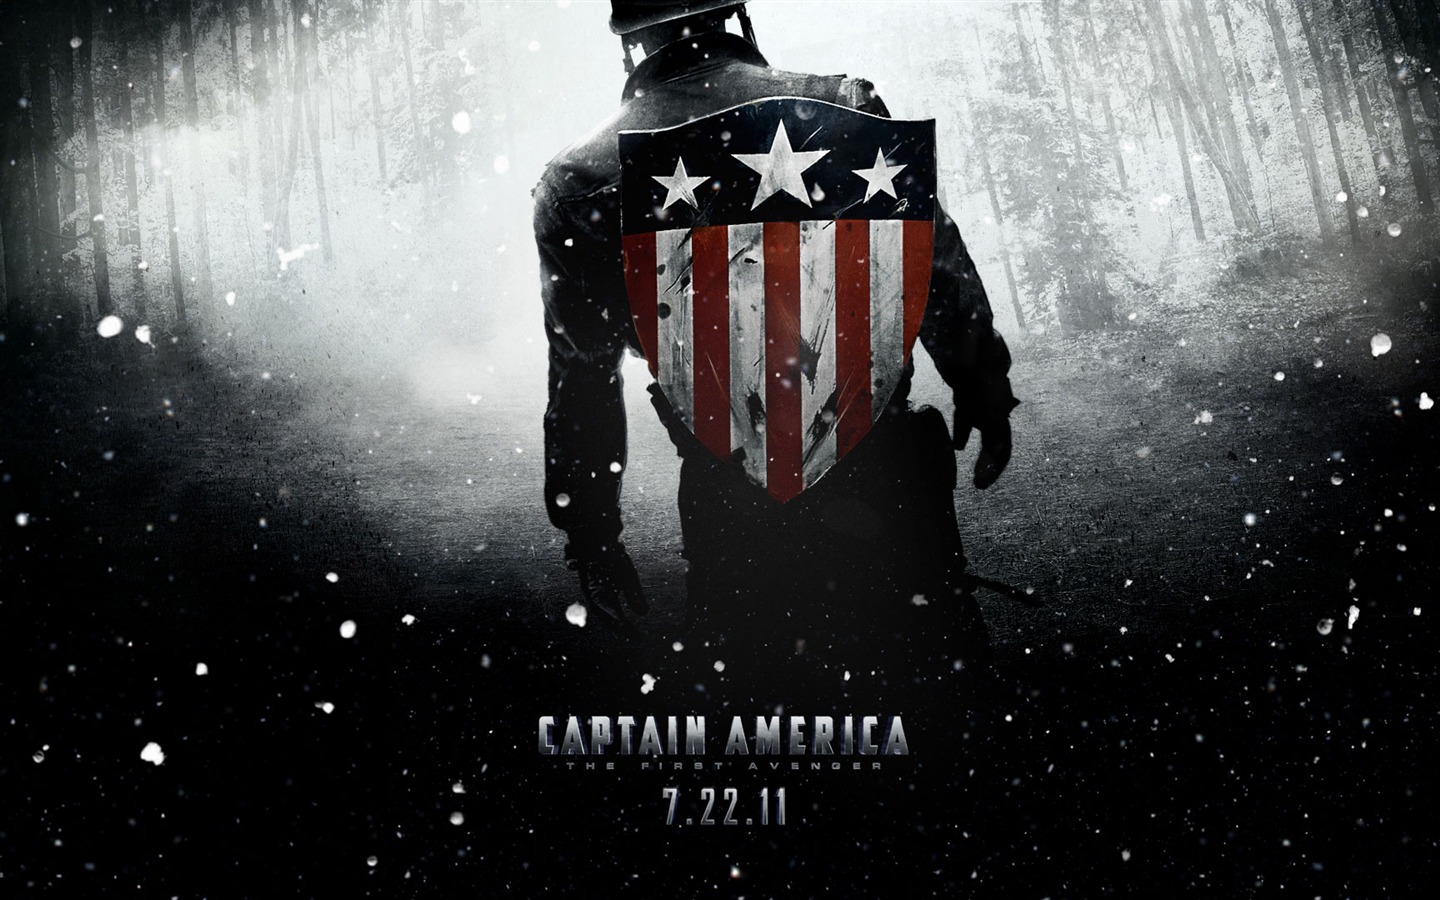 Captain America: The First Avenger wallpapers HD #3 - 1440x900